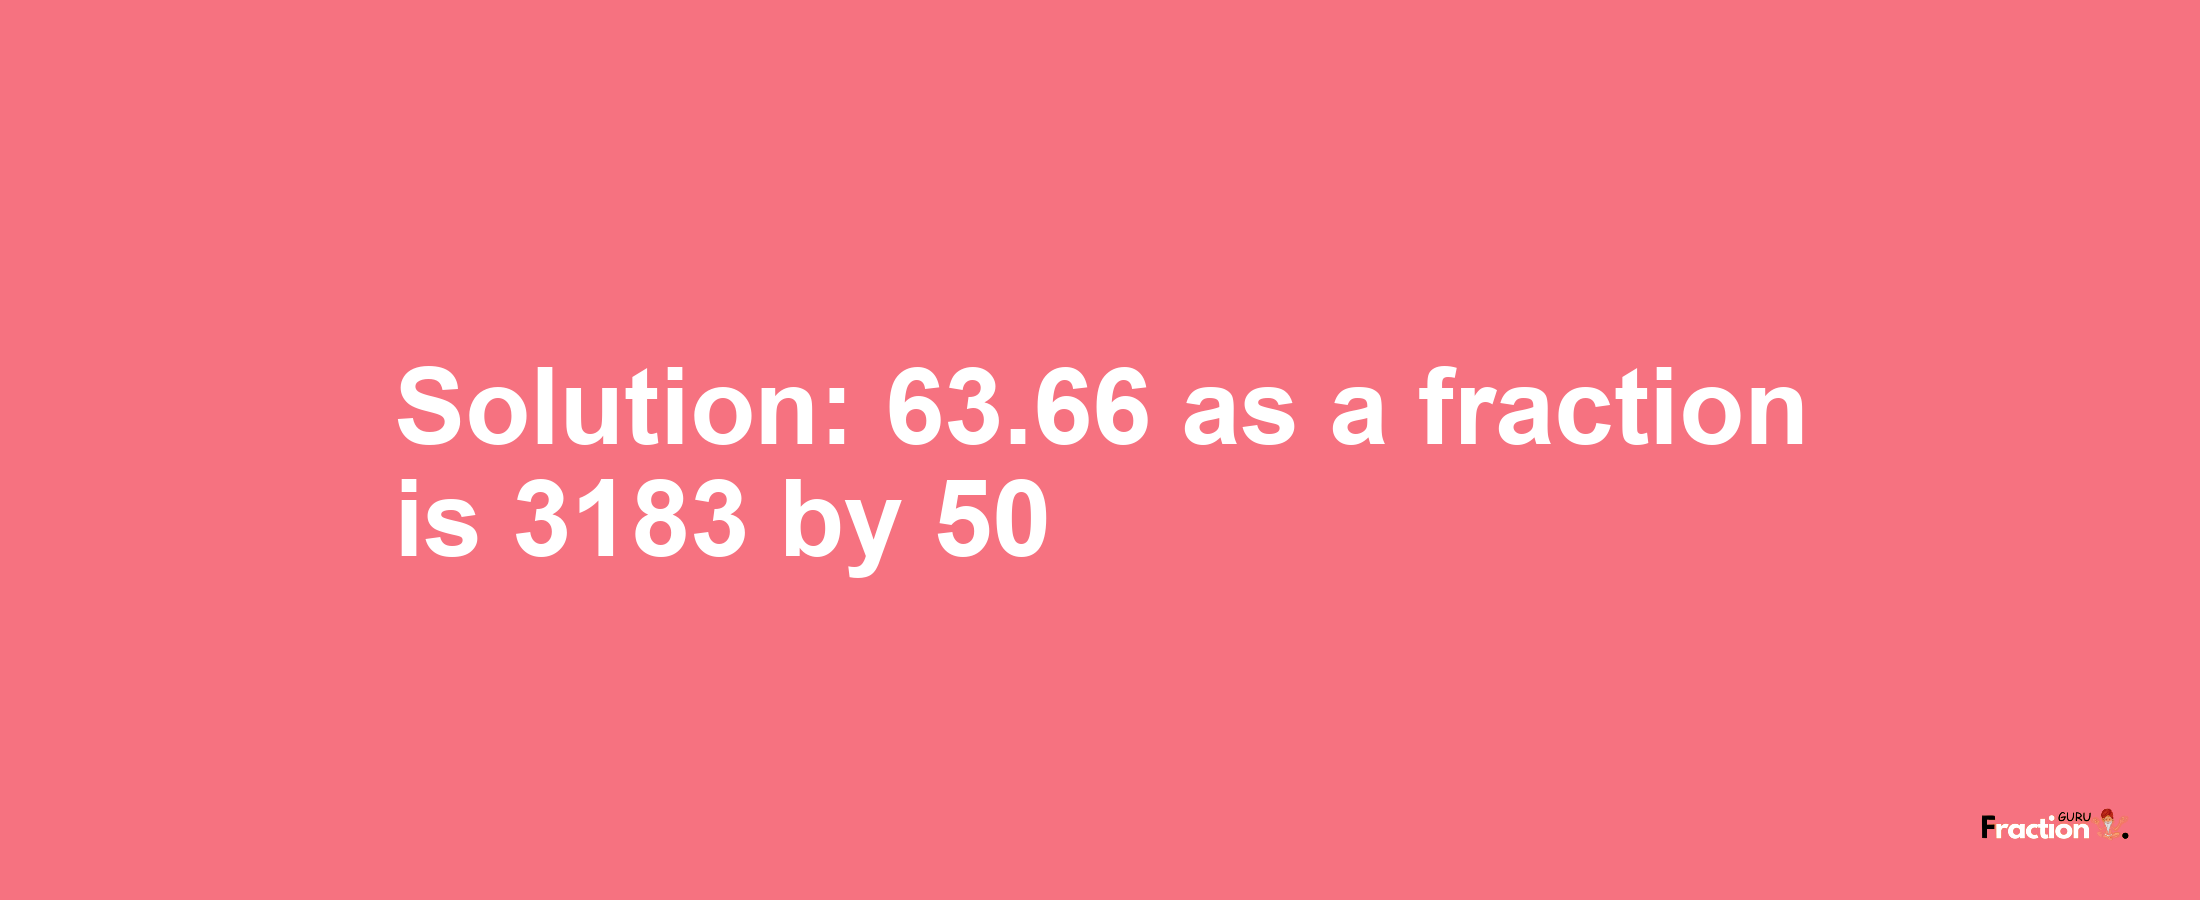 Solution:63.66 as a fraction is 3183/50